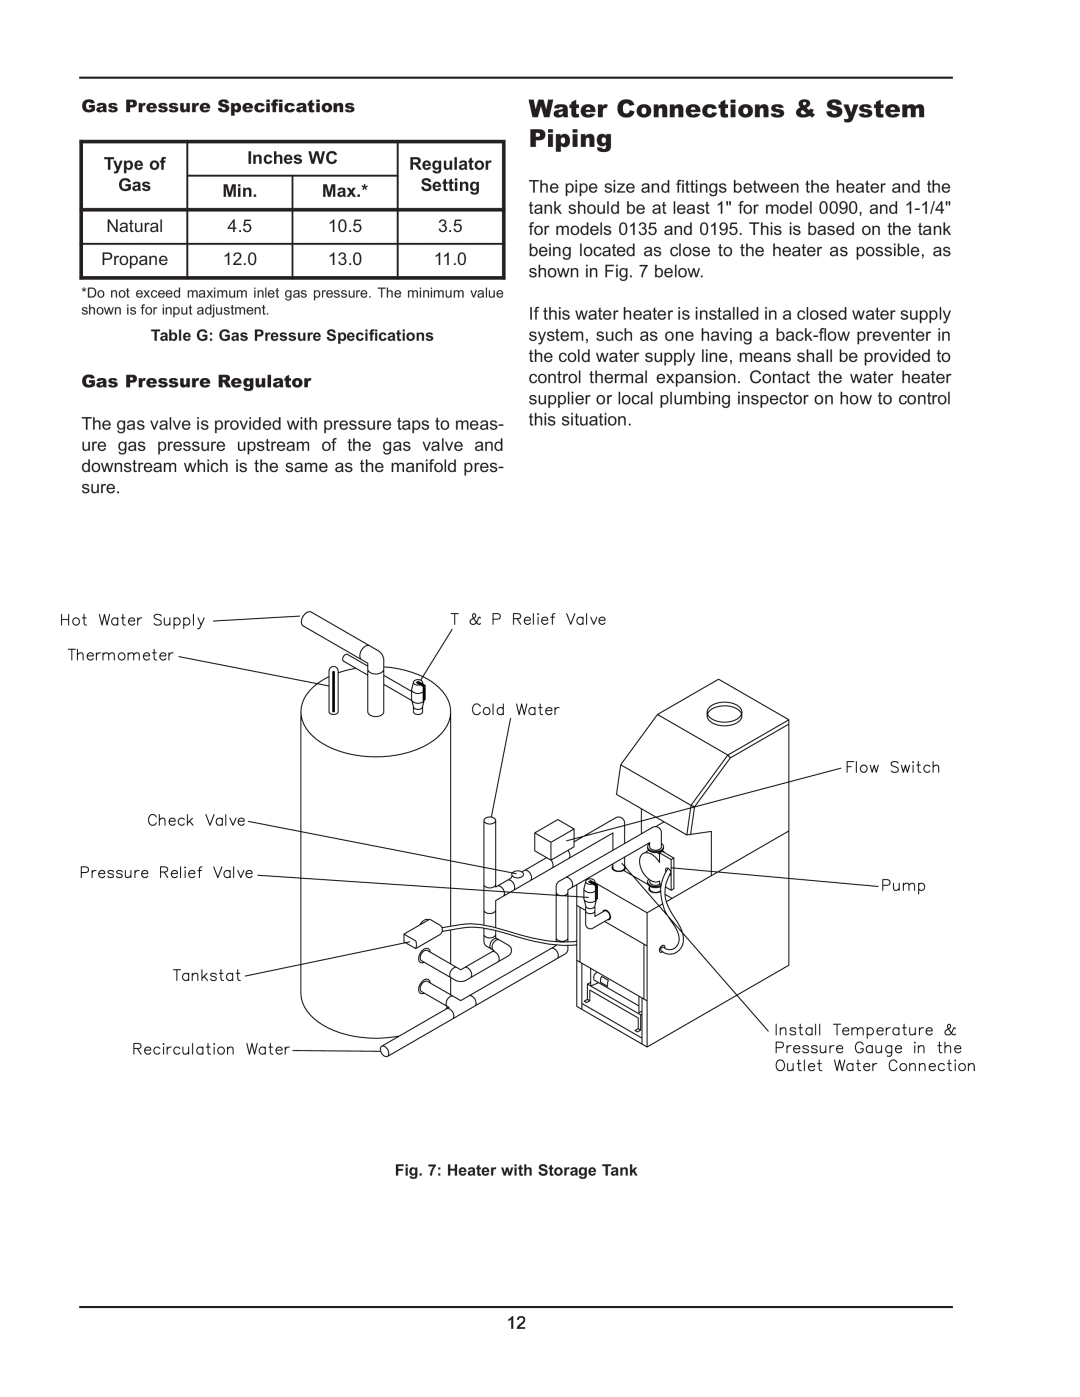 Raypak 0195A, 0135A Water Connections & System Piping, Gas Pressure Specifications, Type of, Inches WC, Regulator, Setting 